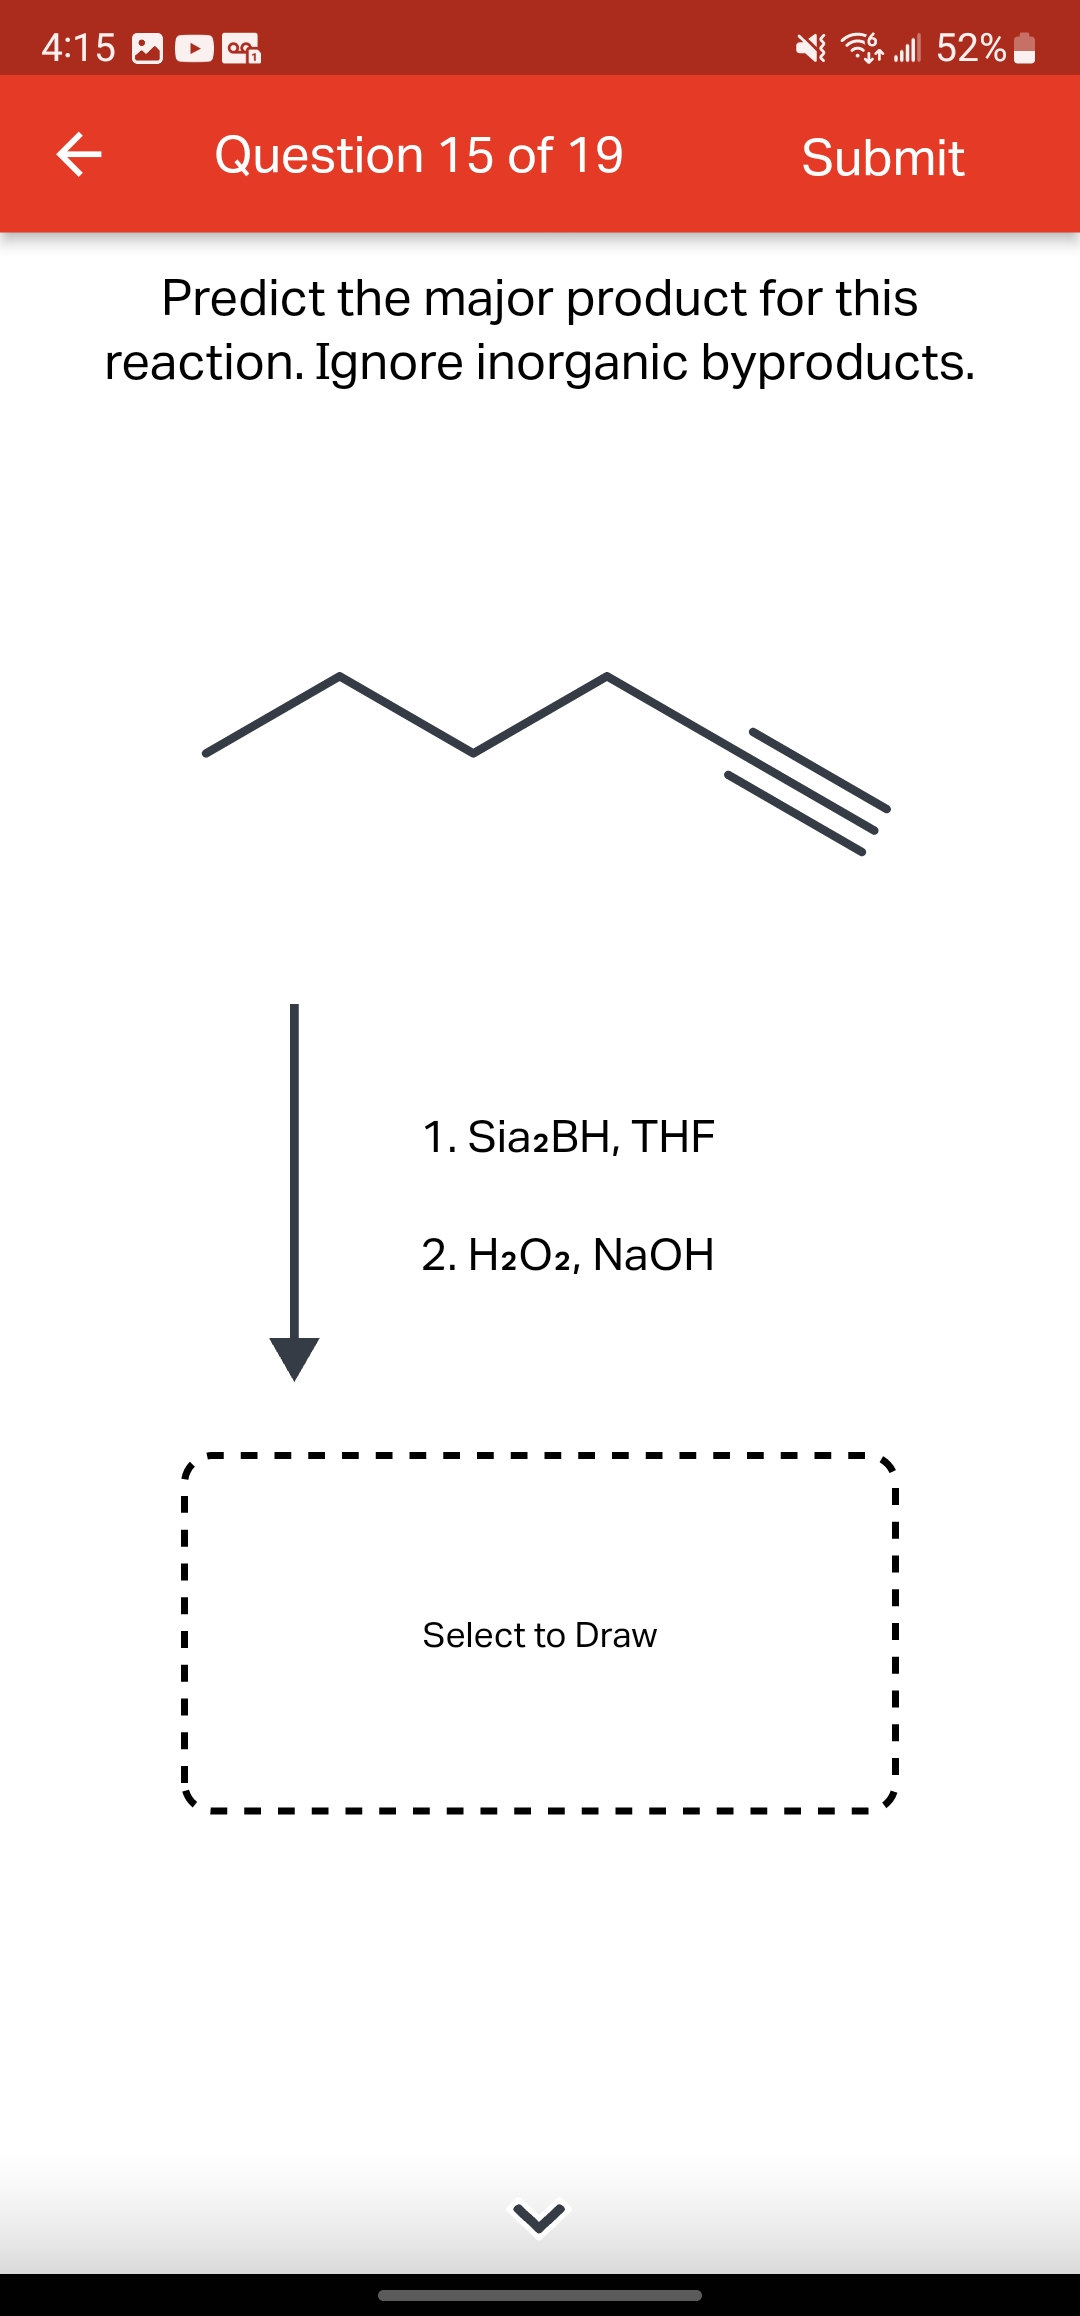 4:15
←
OG
Question 15 of 19
1. Sia2BH, THE
Predict the major product for this
reaction. Ignore inorganic byproducts.
2. H2O2, NaOH
Select to Draw
lll 52%
>
Submit